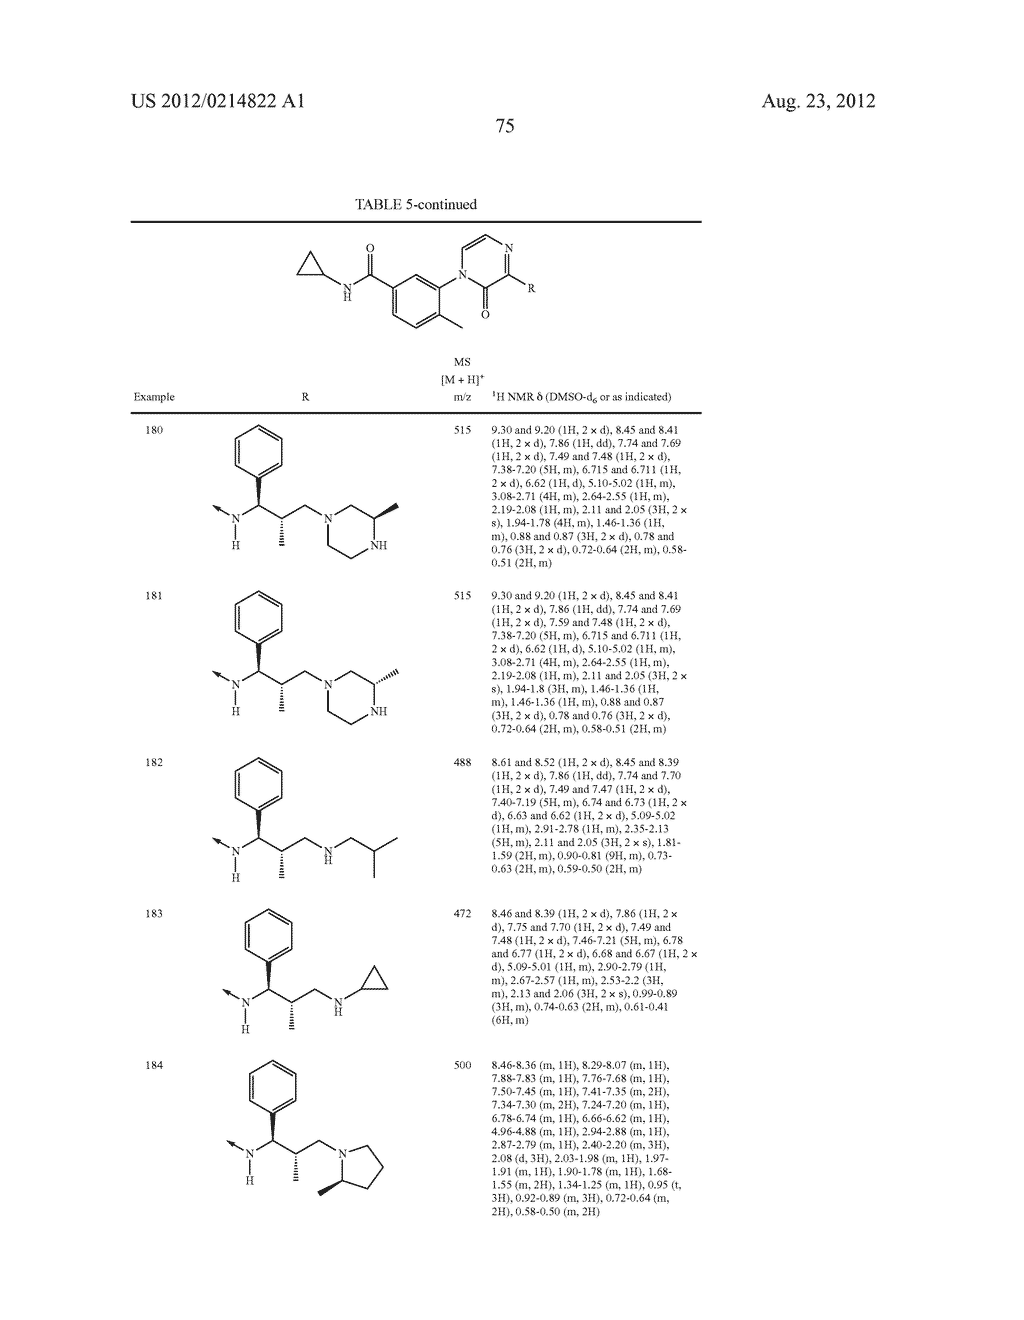 N-CYCLOPROPYL-3-FLUORO-5-[3-[[1-[2-[2-  [(2-HYDROXETHYL)AMINO]     ETHOXY]PHENYL] CYCLOPROPYL] AMINO]-2-OXO- 1     (2H)-PYRAZINYL]-4-METHYL-BENZAMIDE, OR PHARMACEUTICALLY ACCEPTABLE SALTS     THEREOF AND THEIR USES - diagram, schematic, and image 82